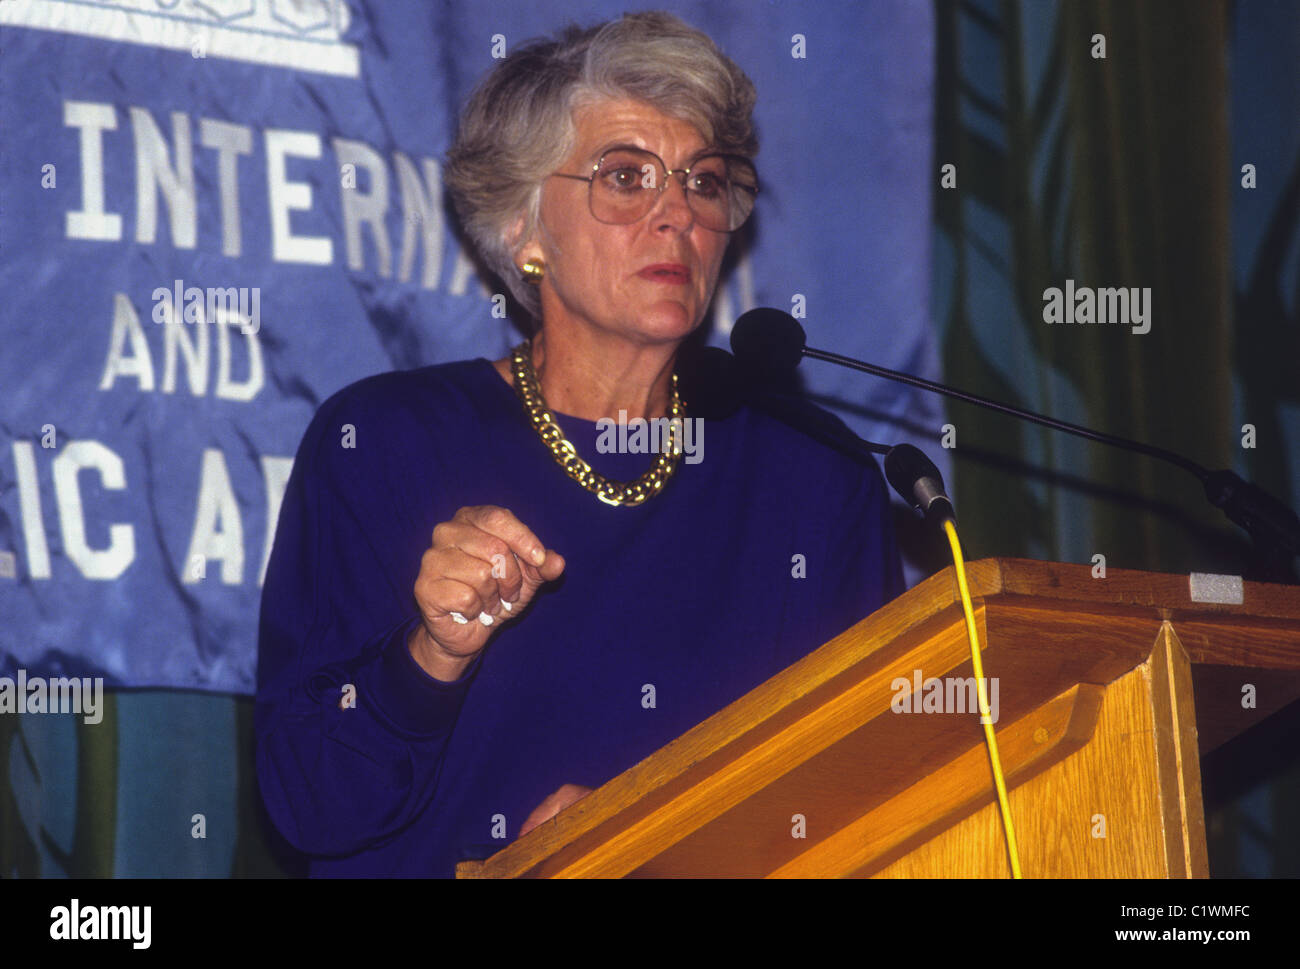 Geraldine Anne Ferraro (August 26, 1935 – March 26, 2011) former vice presidential candidate, speaking at Columbia University Stock Photo